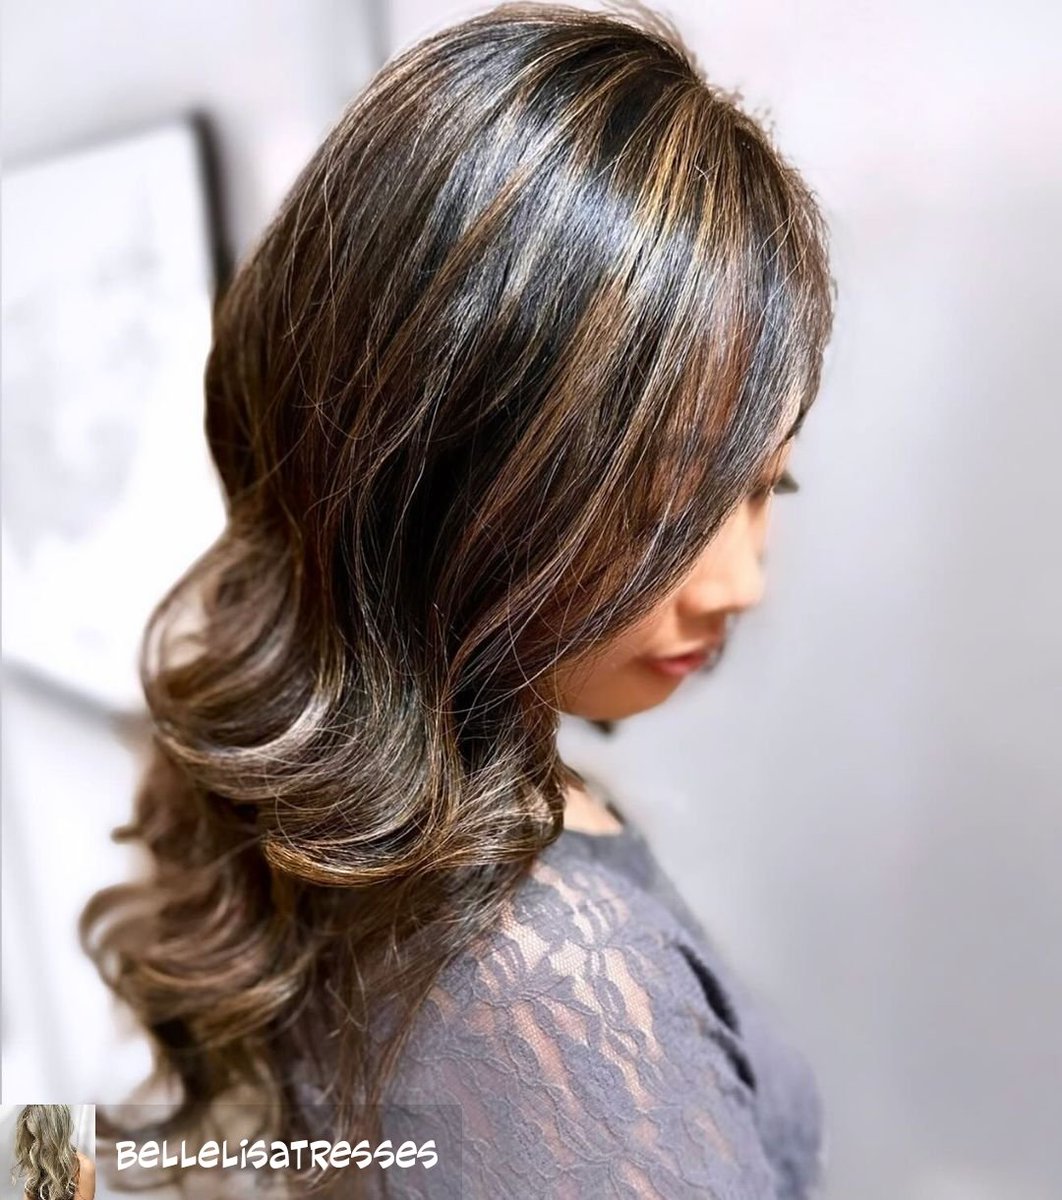 💫Sensational Brown Highlights💫
.
.
.
.
.
Credit to @bellelisatresses 

#bellelisatresses #softhighlights #brunette #brunettehighlights #brunettehair #richbrownhair #subtlehighlights #brunettebeauty #wellahair #wella #wellacolor #wellaprofessional #stylistssupportingstylists